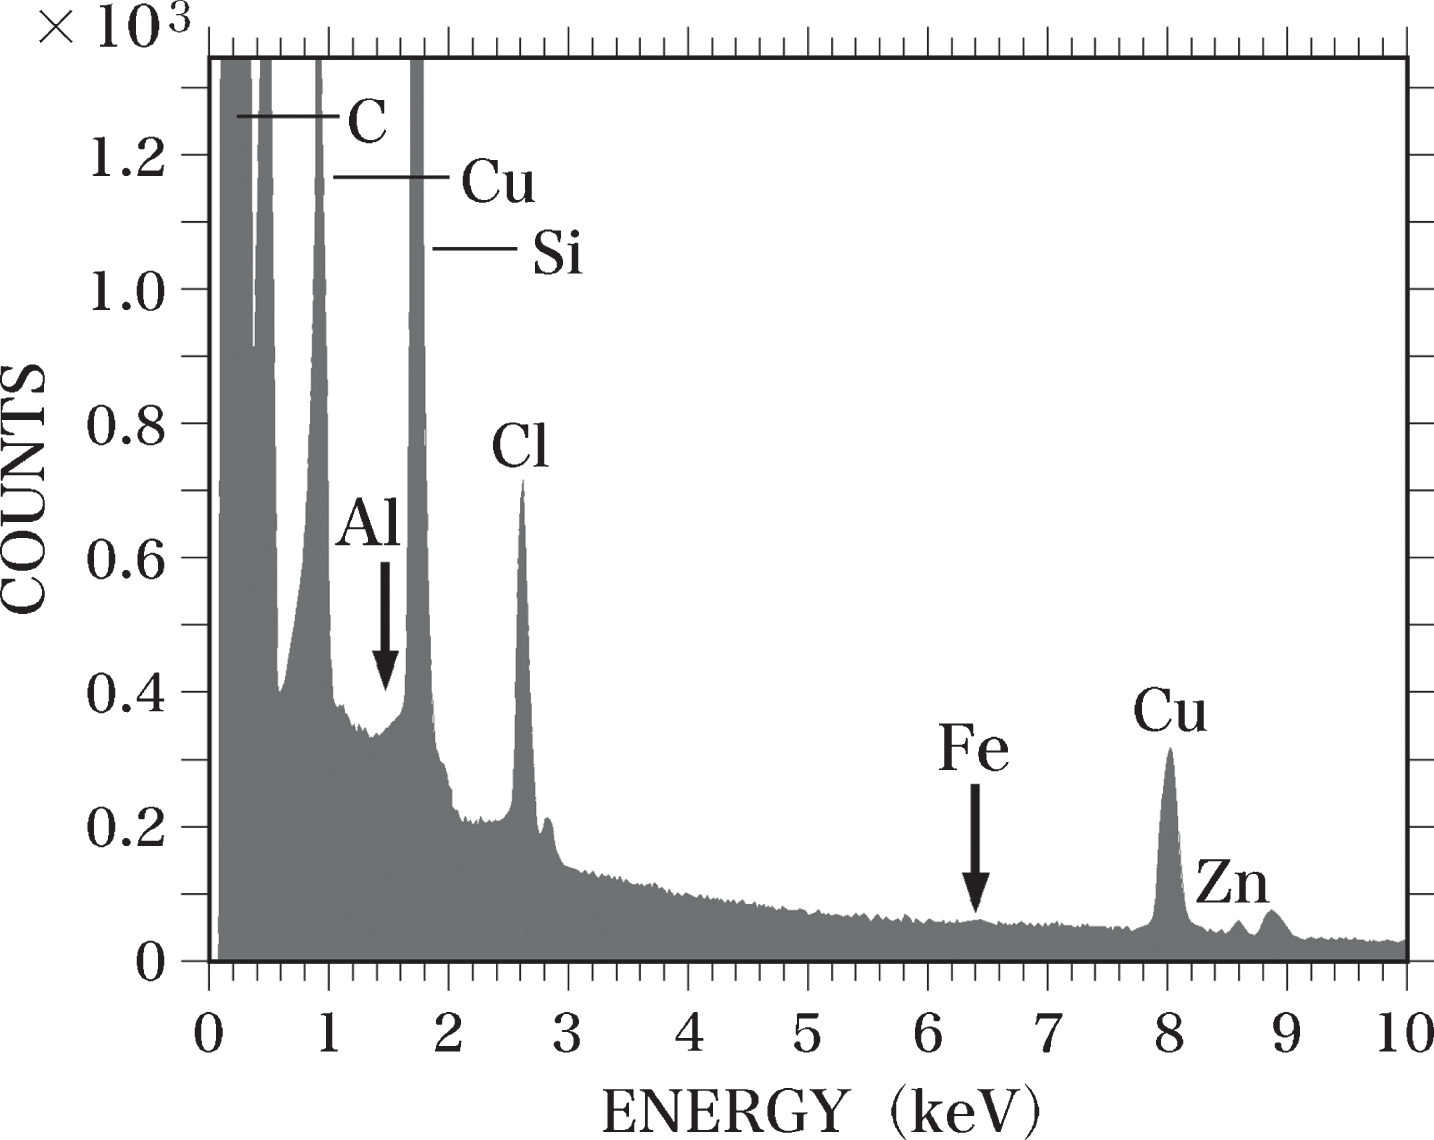 EDS spectrum of an Epon section. A semi-thin section (0.4-μm thick) of Epon was analyzed using EDS. No Al or Fe (arrows) was detected in the section. The Si peak is considered to be generated from contamination by oil vapor evaporated from the vacuum pump oil. The Cl peak was considered to originate from the Epon itself.